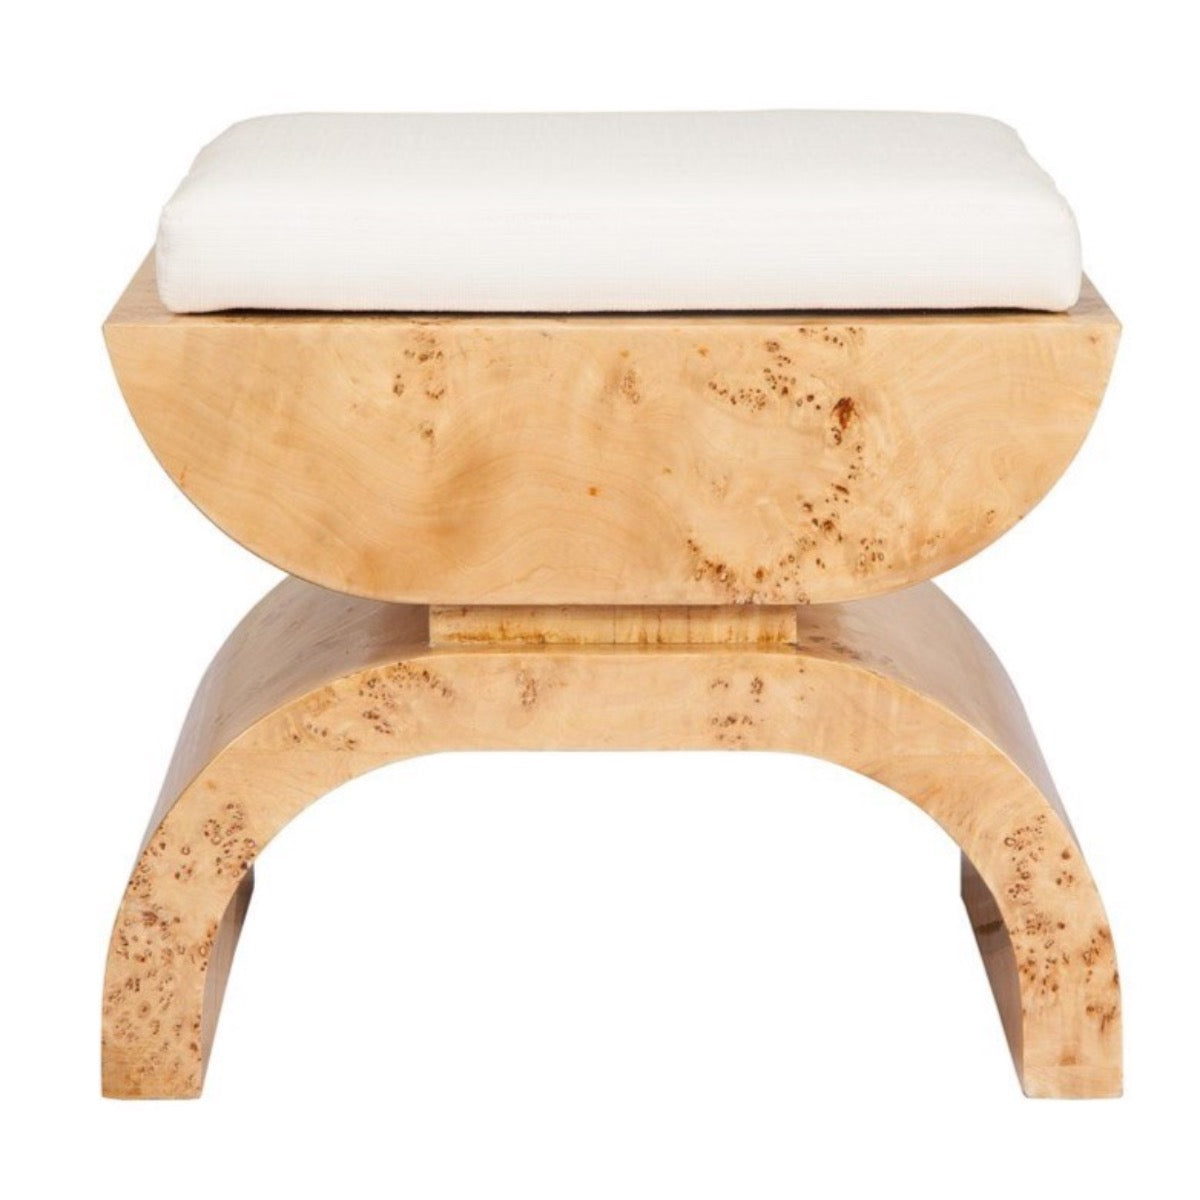 Burl Wood Stool. Front view.